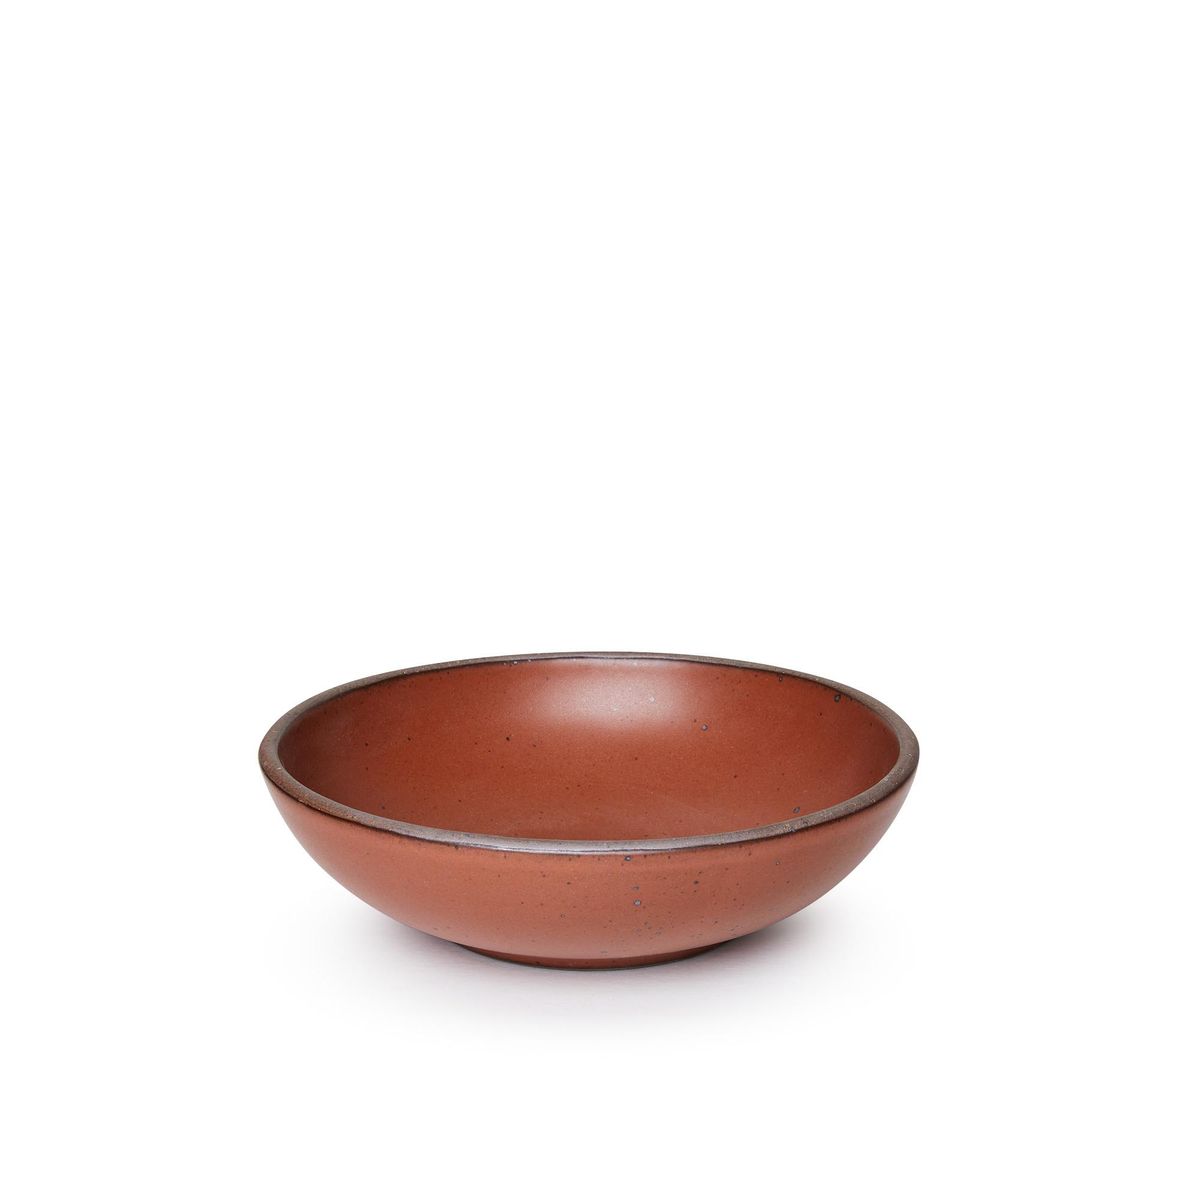 A dinner-sized shallow ceramic bowl in a cool burnt terracotta color featuring iron speckles and an unglazed rim